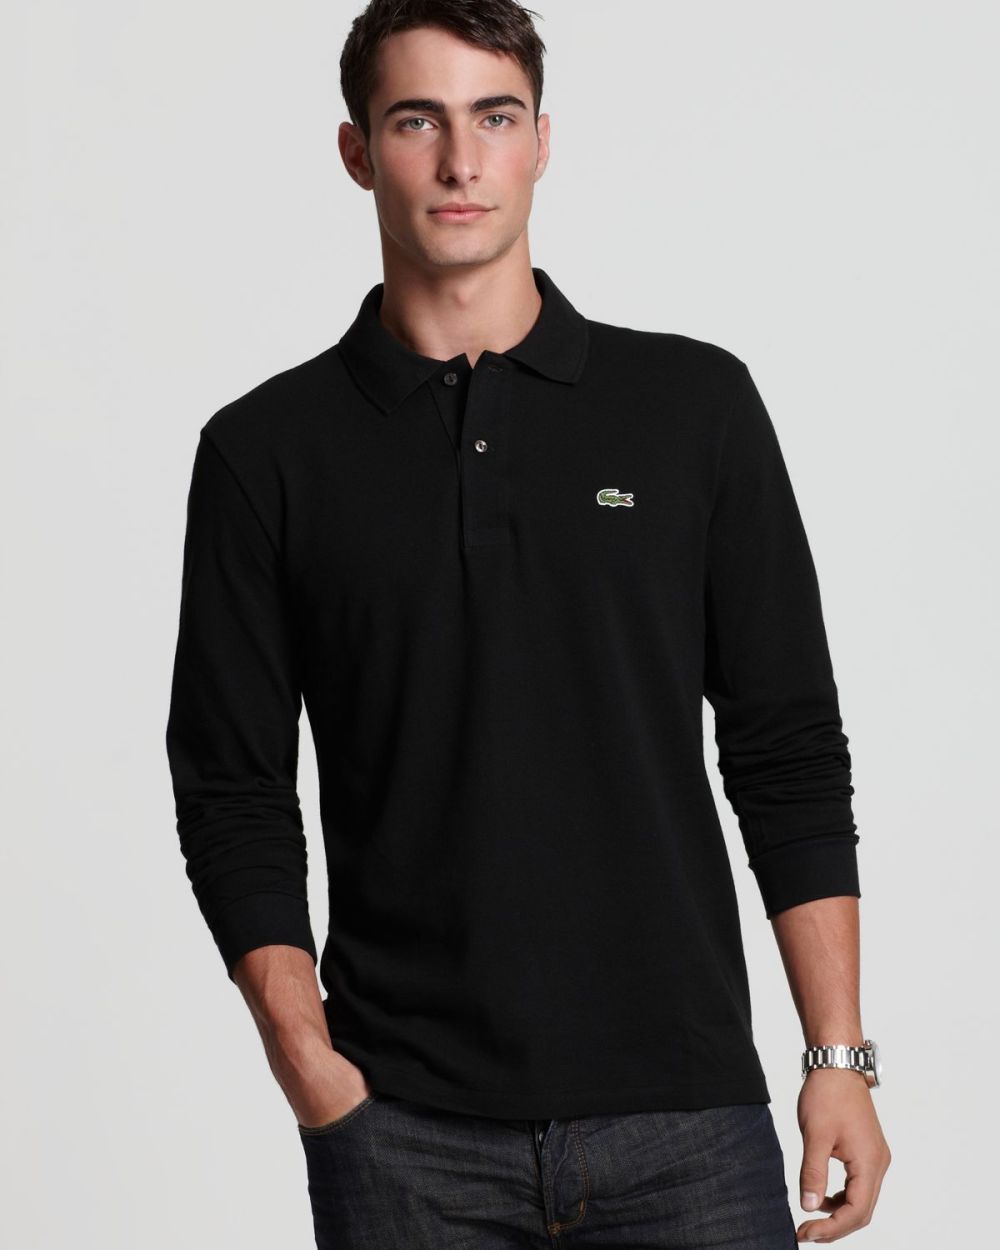 lacoste-black-long-sleeve-classic-fit-pique-polo-product-1-13981113-172355381